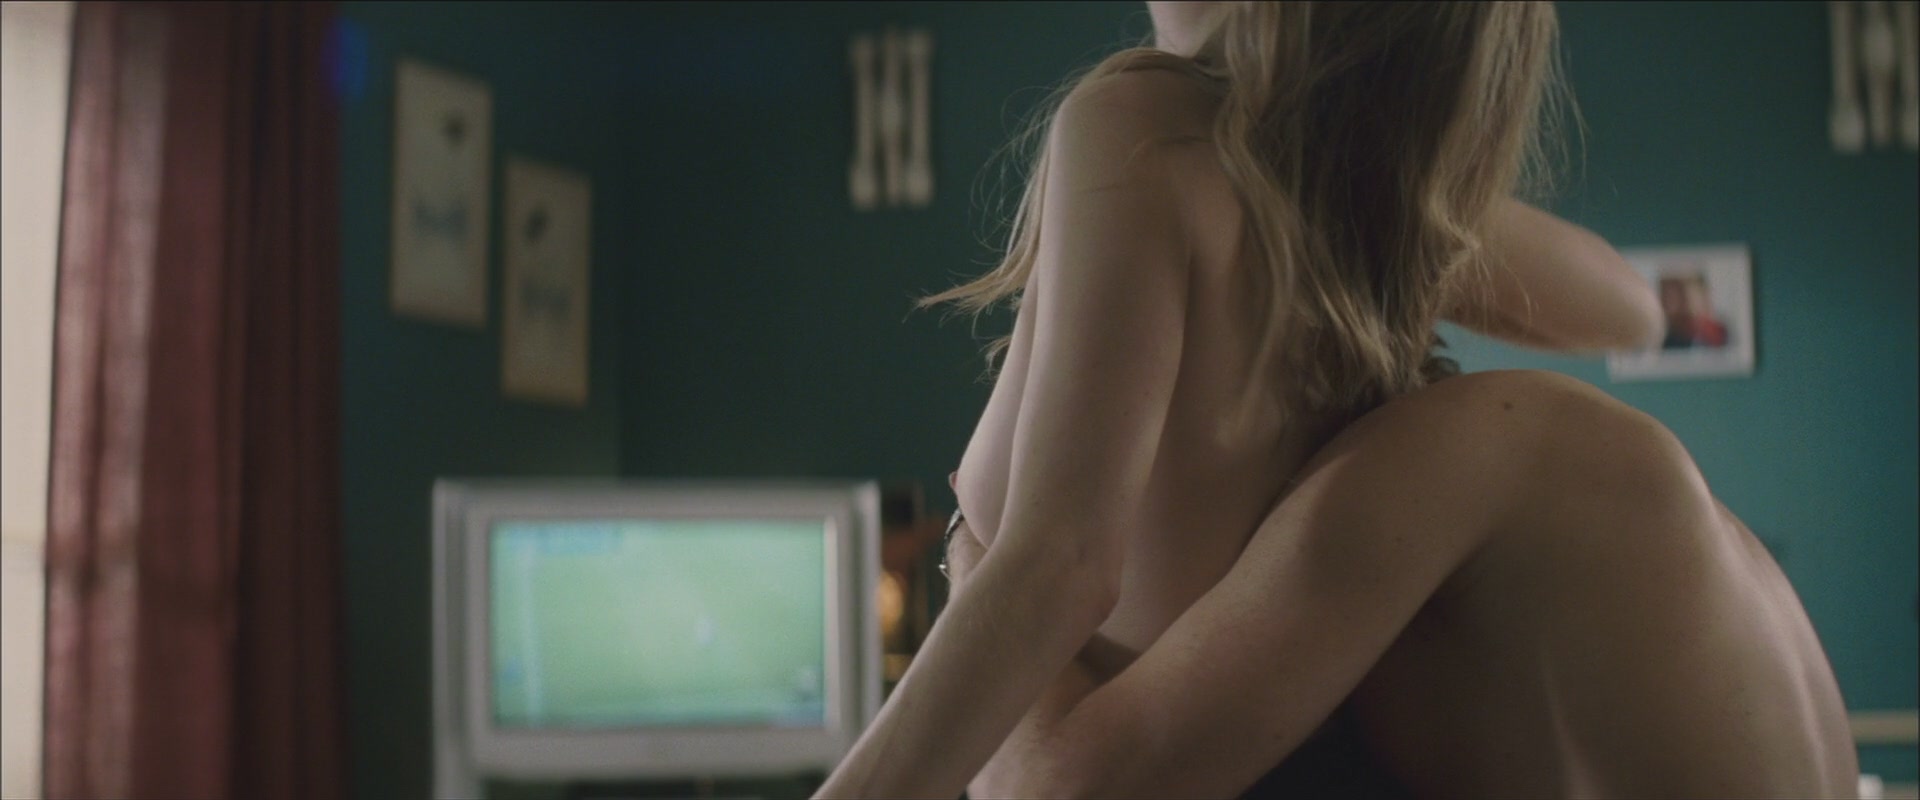 Naked Michelle Williams In Incendiary